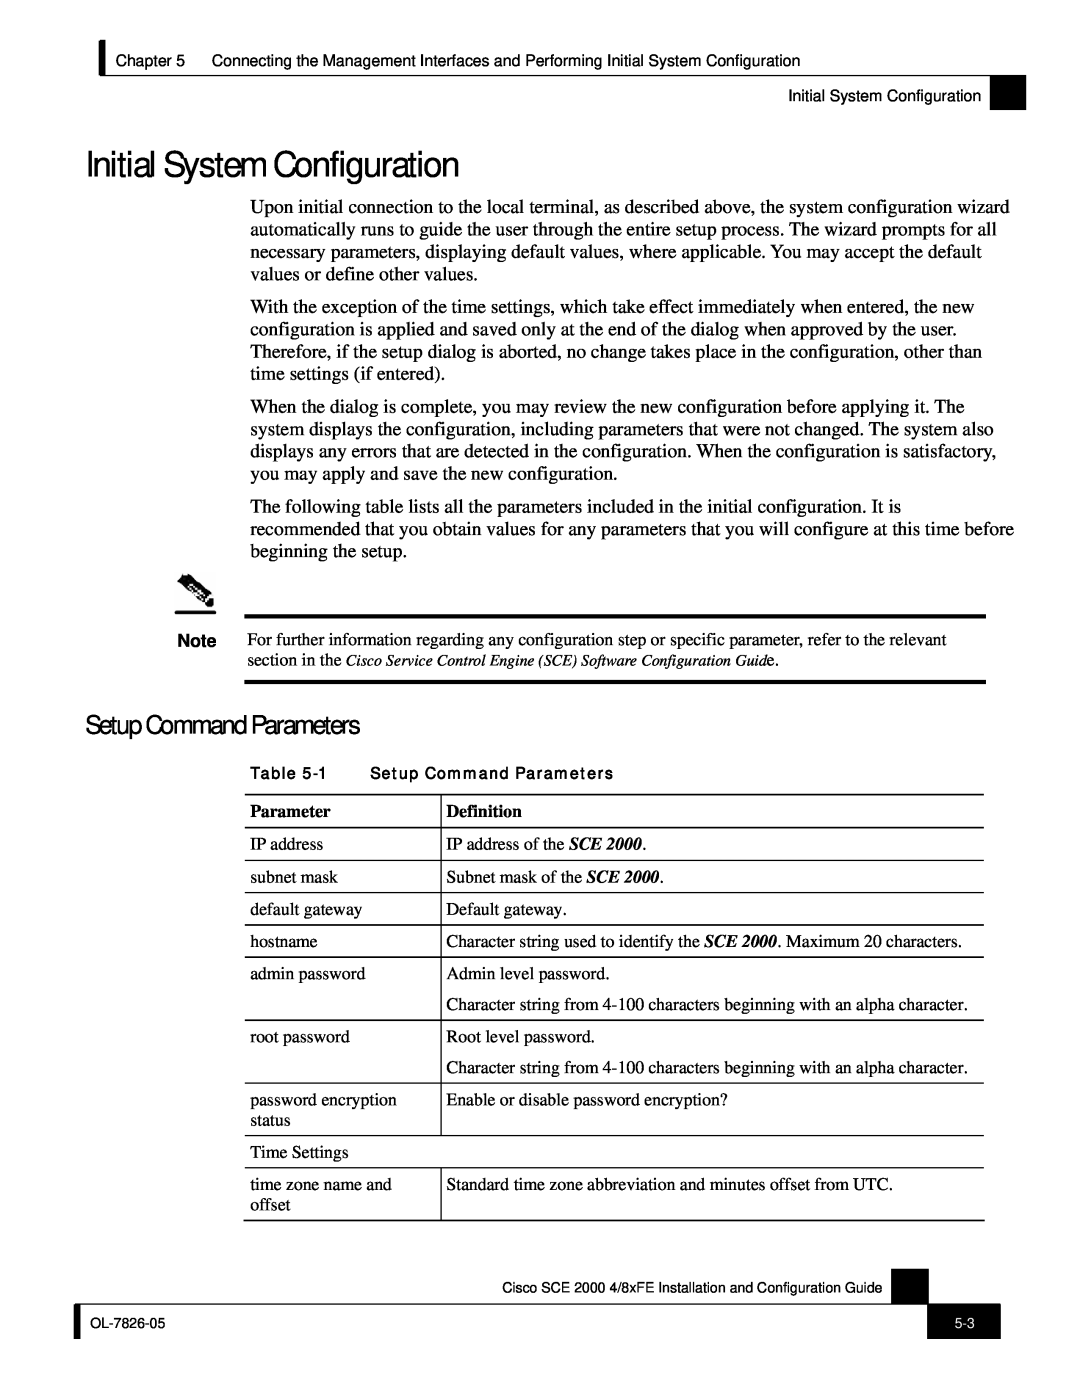 Cisco Systems SCE 2000 4/8xFE manual Initial System Configuration, Setup Command Parameters 